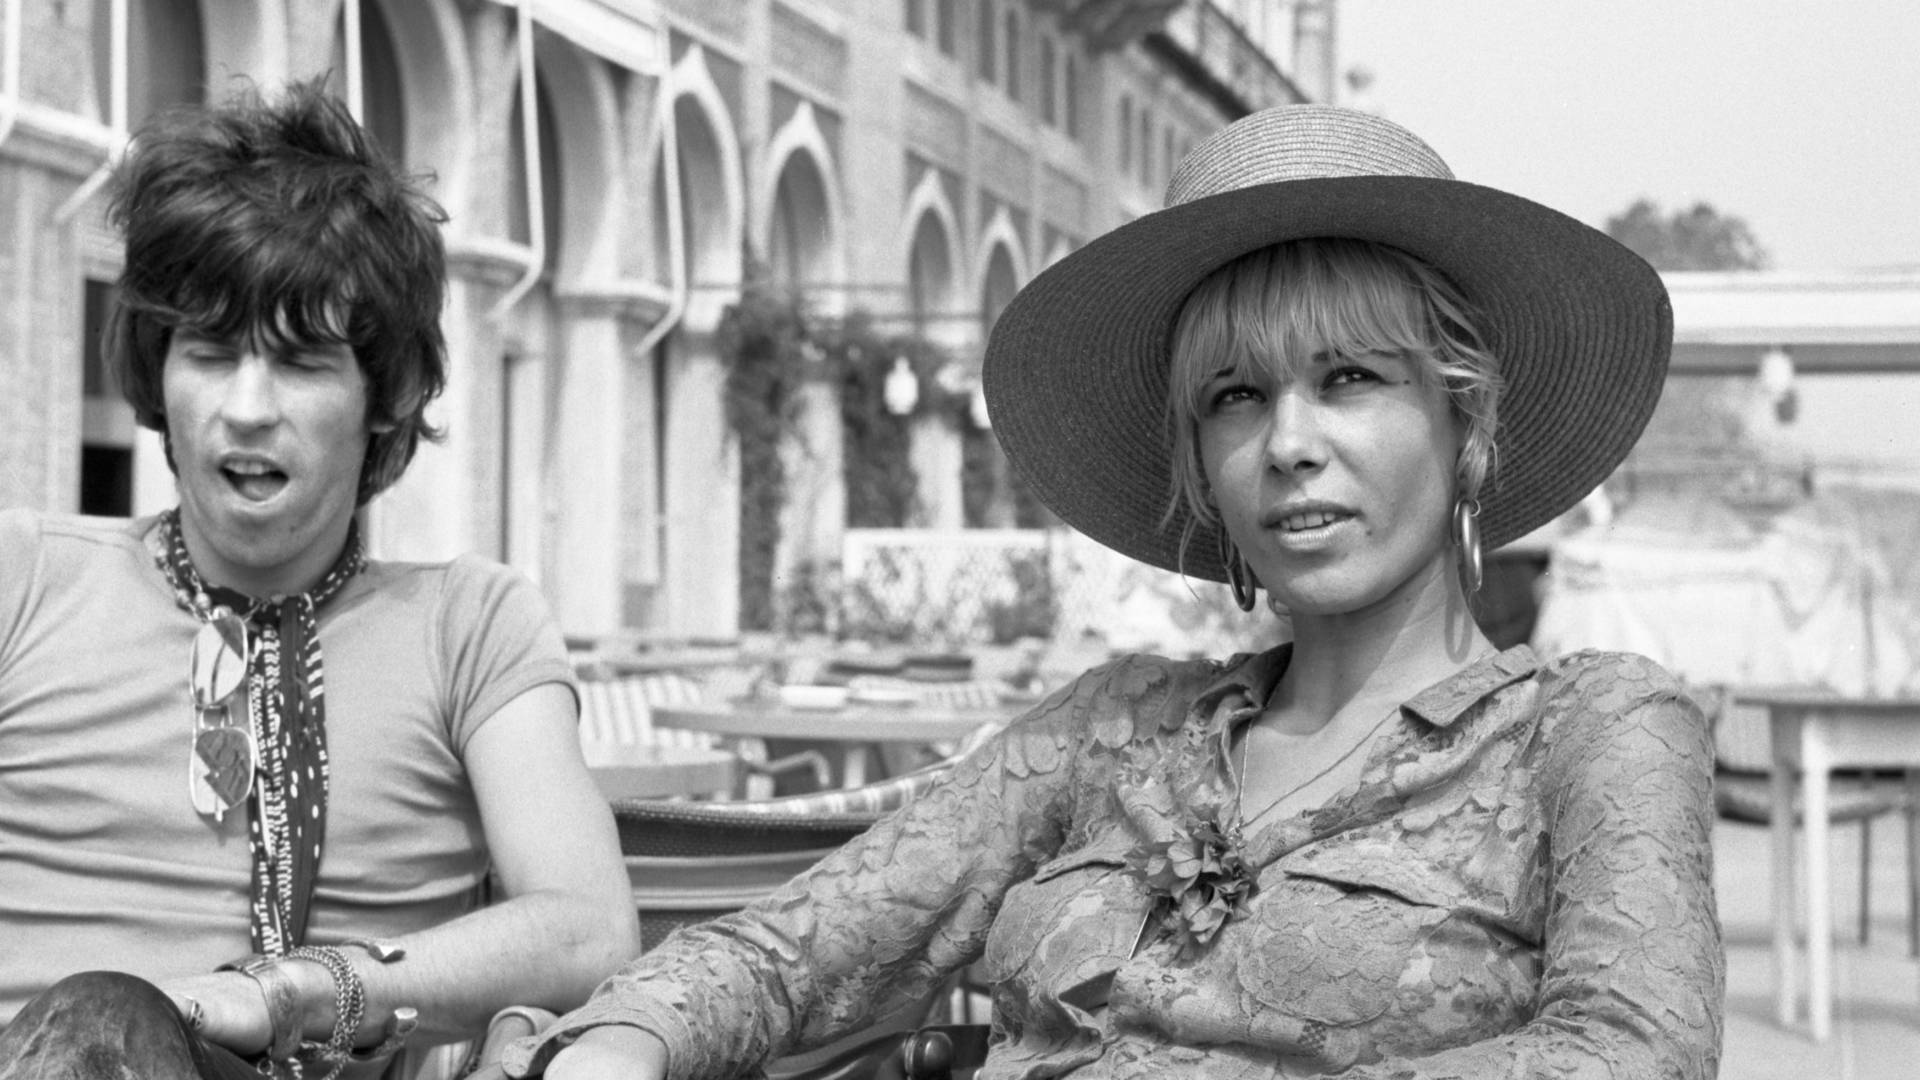 Anita Pallenberg, sitting outside the Excelsior Hotel in Venice alongside Keith Richards in 1967 Photo: Archivio Cameraphoto Epoche/Getty Images